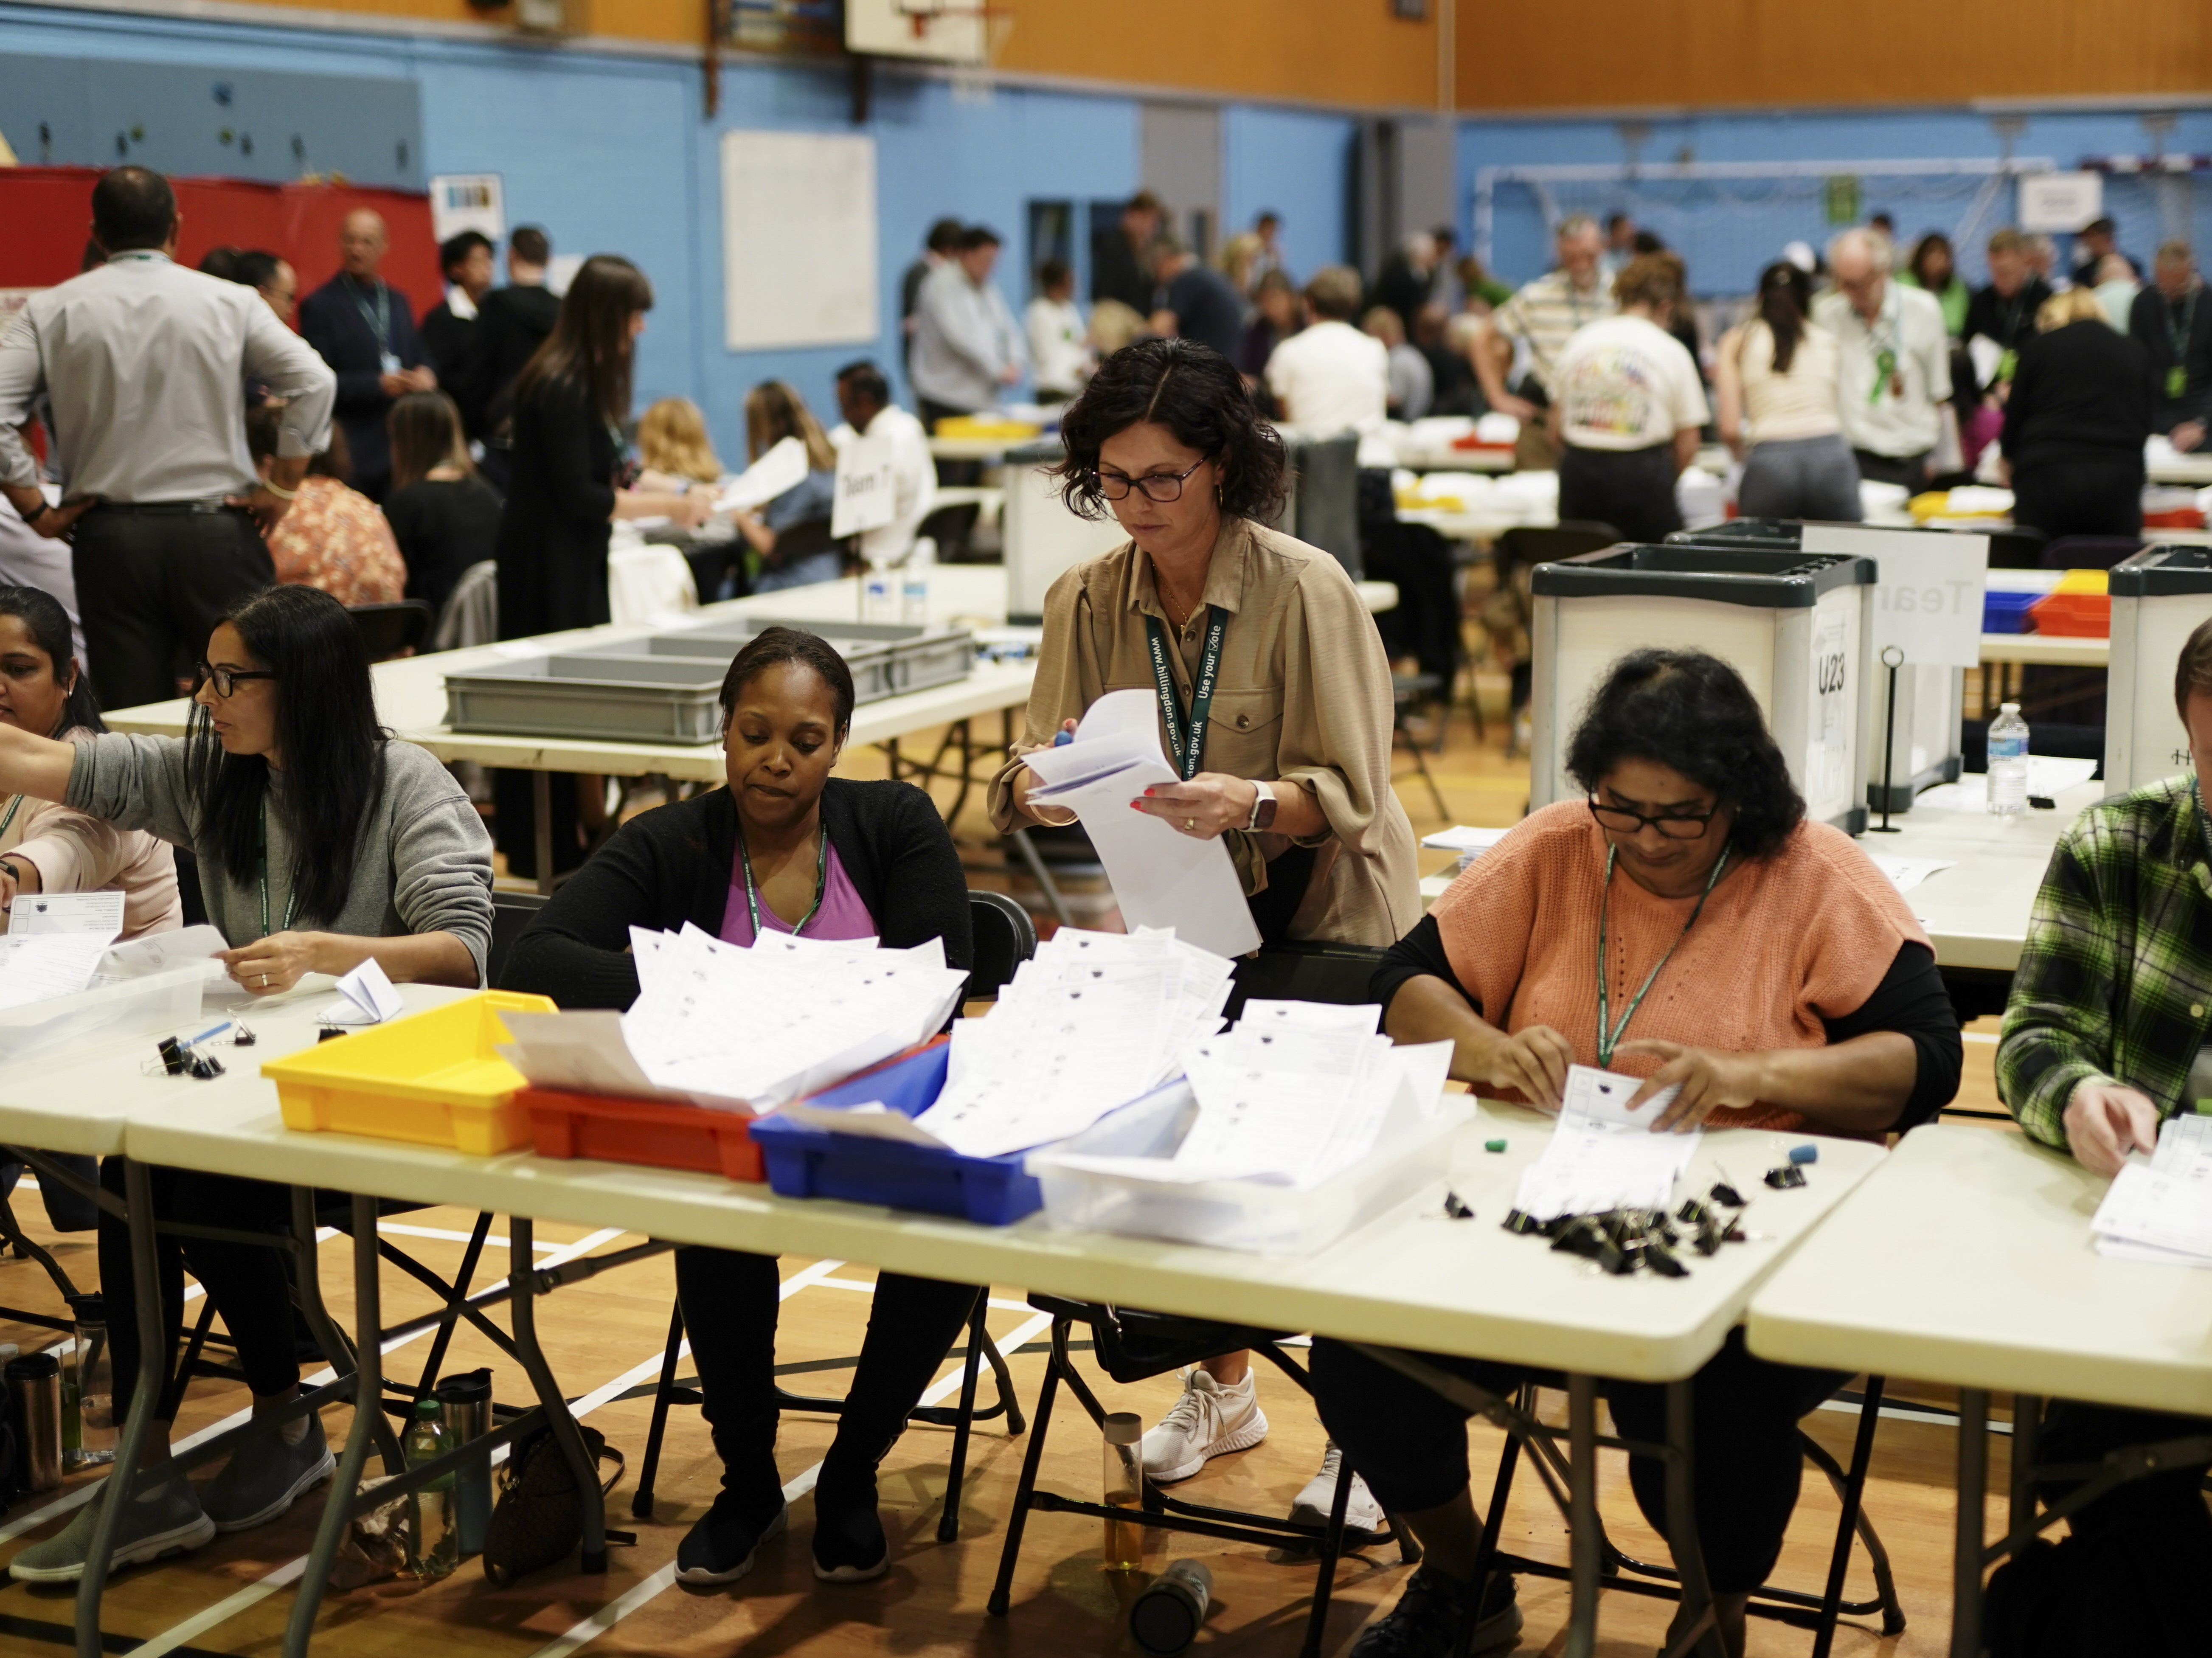 Ballots are counted at recent Uxbridge by-election